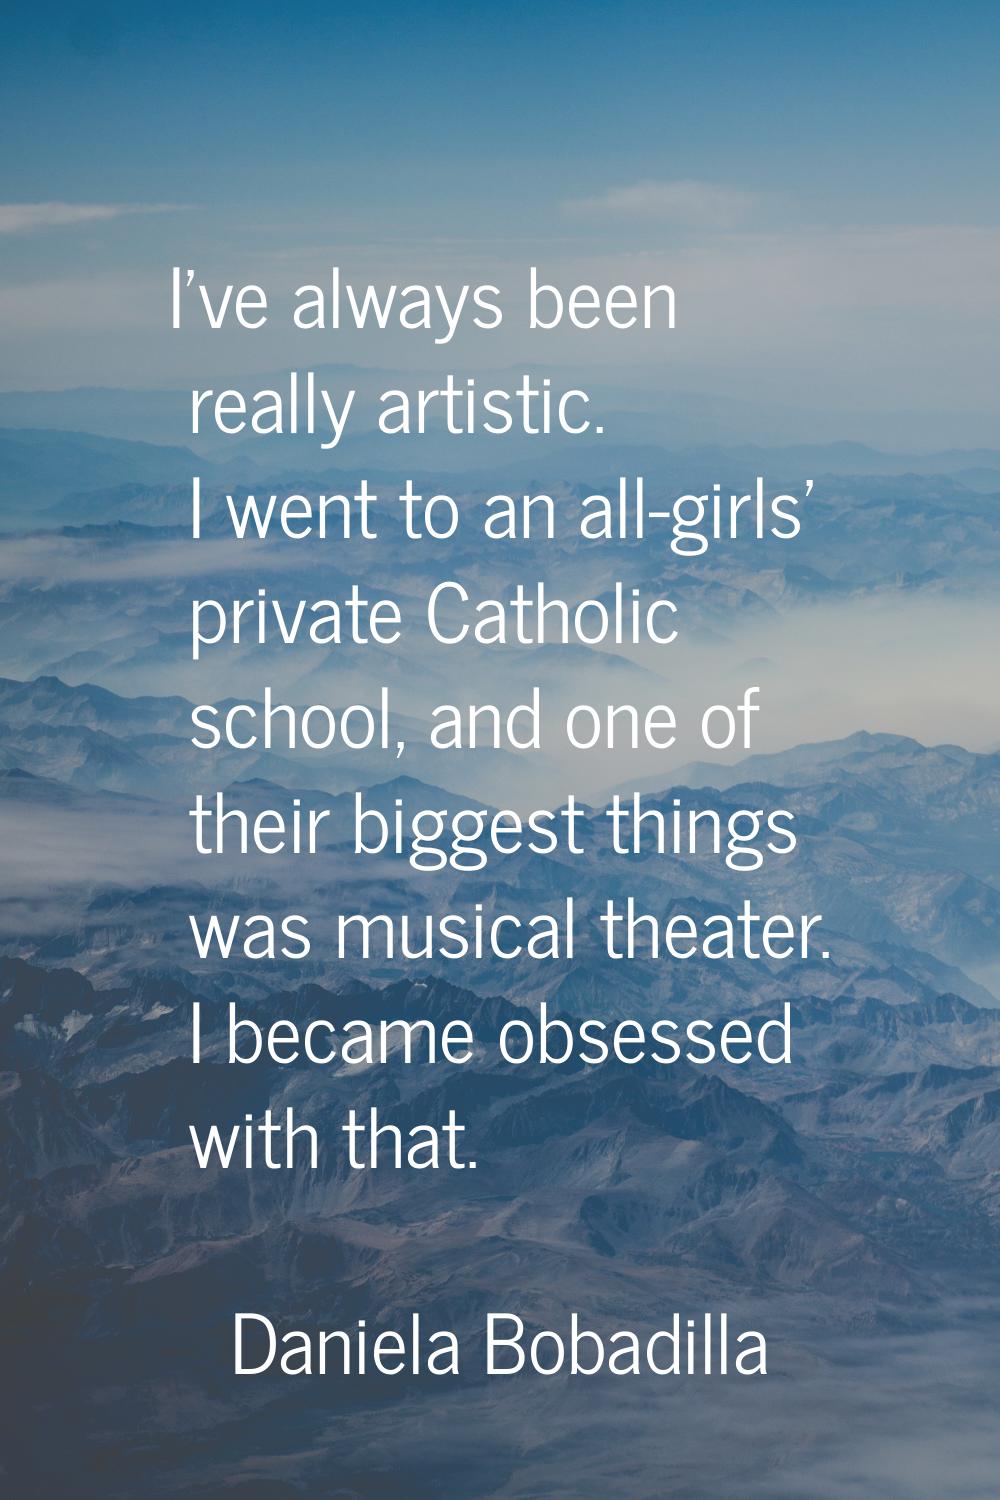 I've always been really artistic. I went to an all-girls' private Catholic school, and one of their